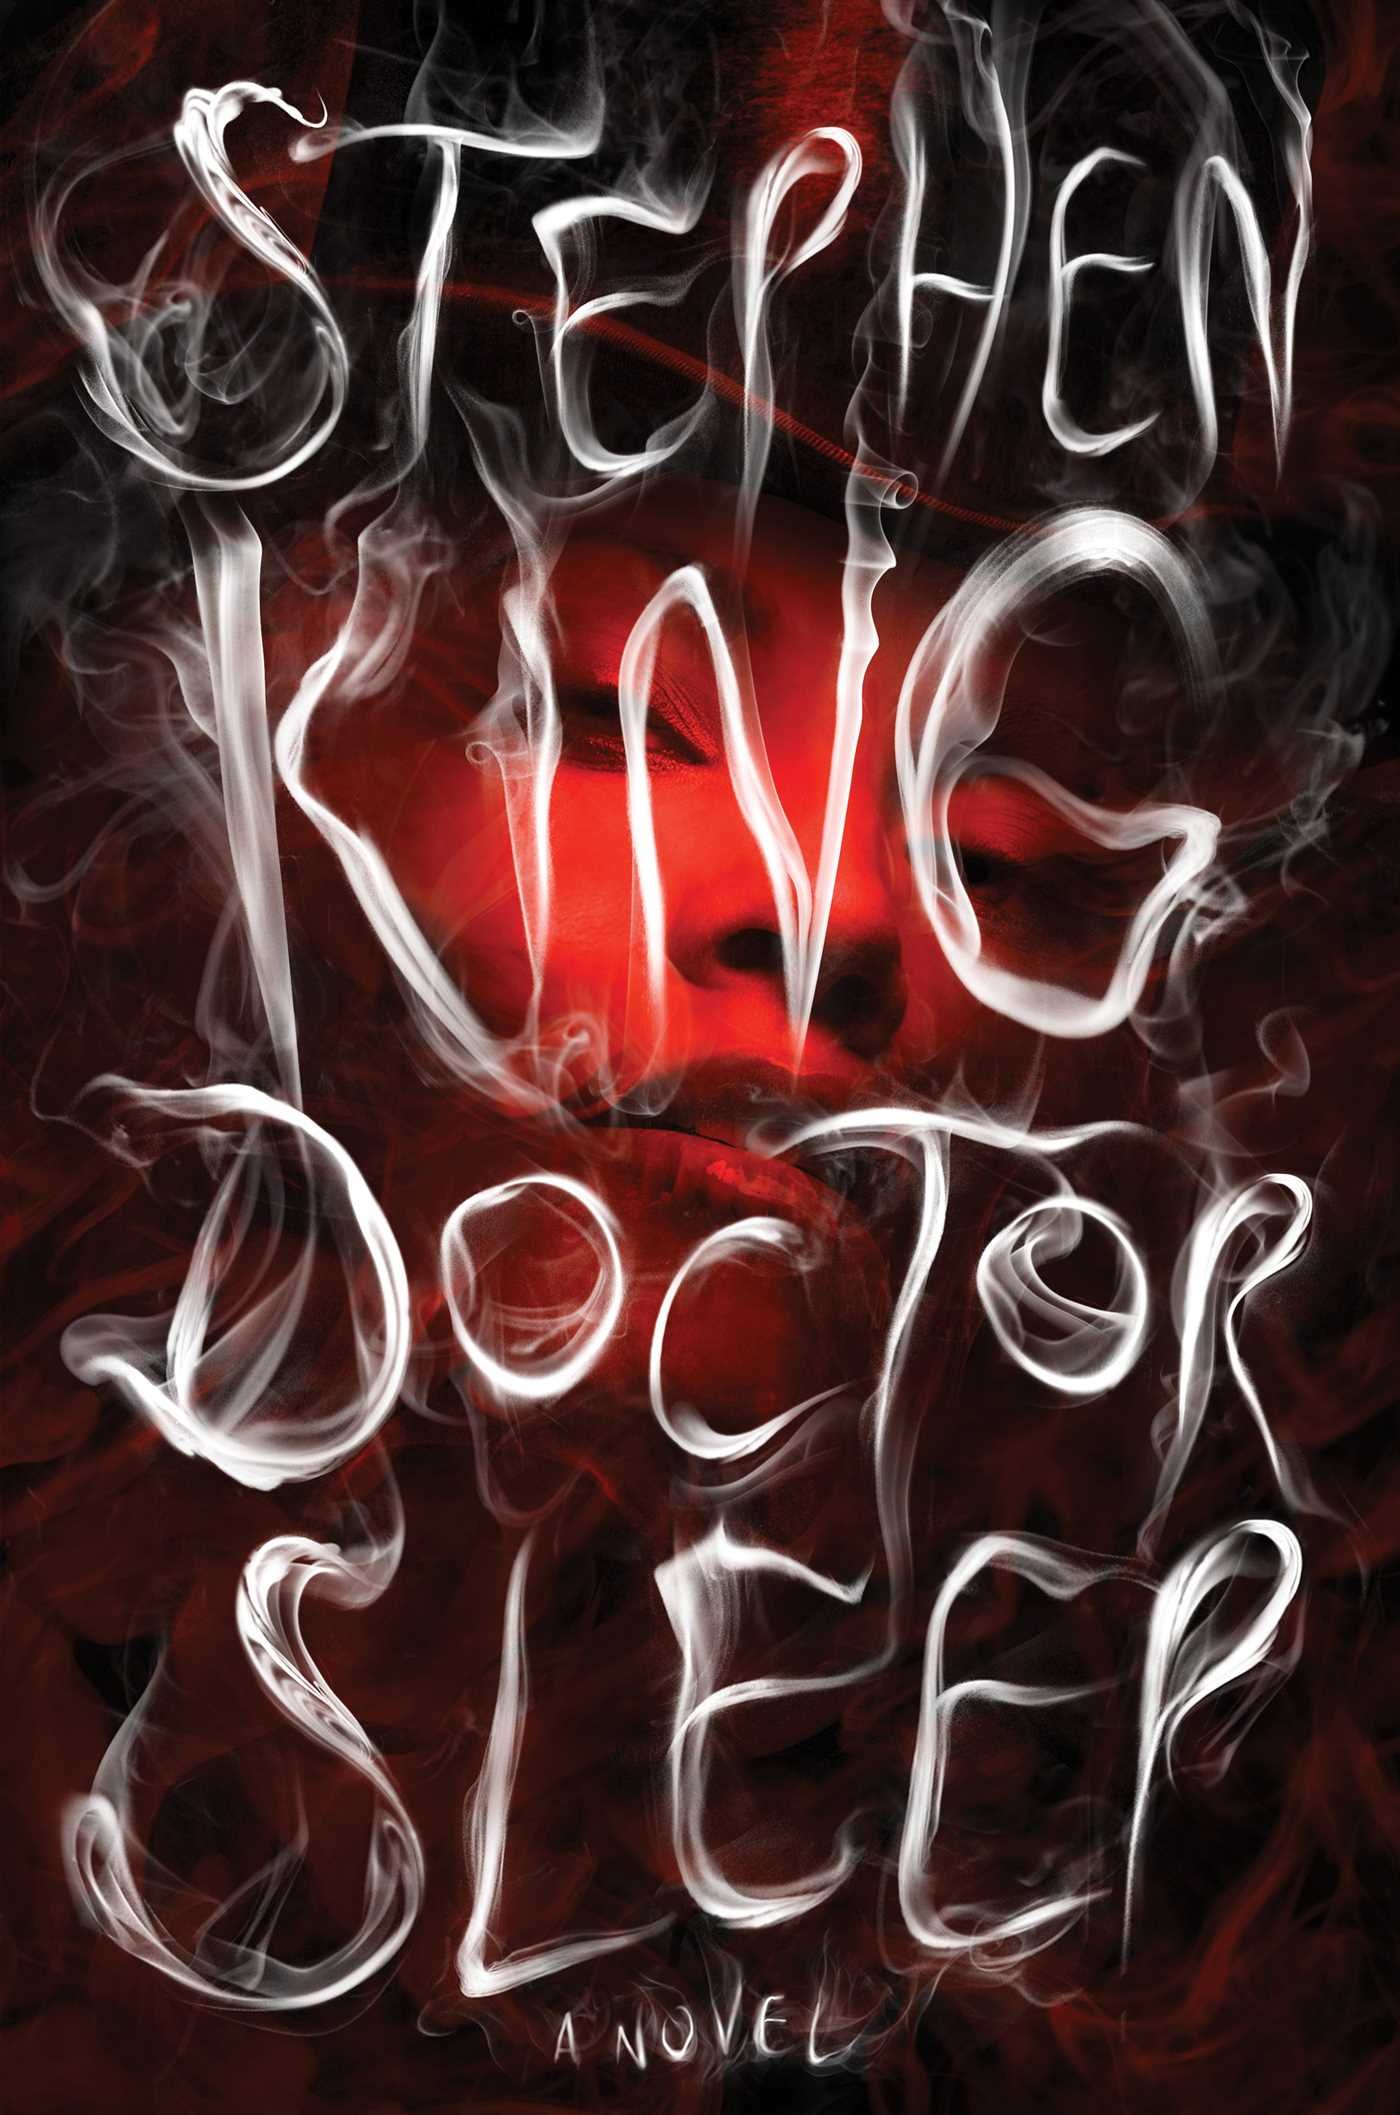 Smoke and mystery: the haunting cover of stephen king's "doctor sleep," where glowing eyes pierce through the darkness.